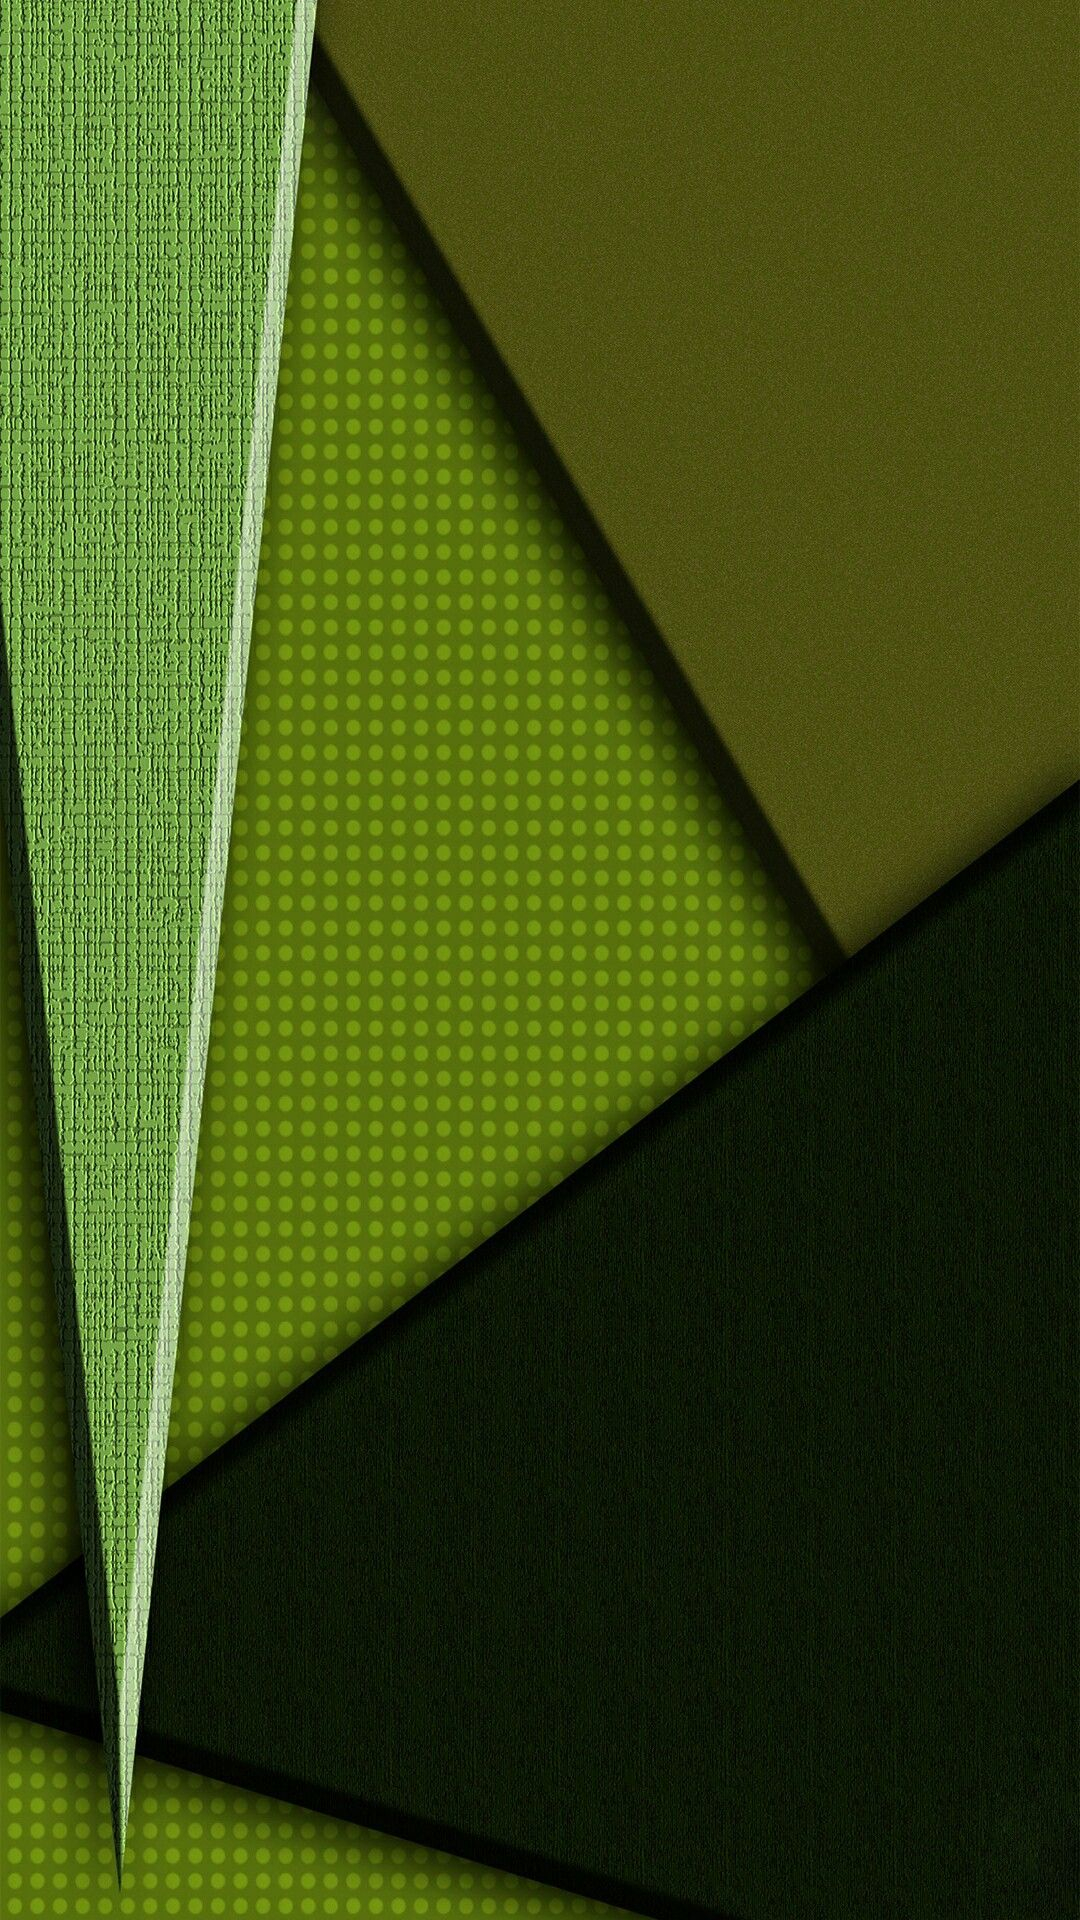 1080x1920 Green Olive Abstract Wallpaper | Screen savers wallpapers, Samsung galaxy wallpaper, Hd backgrounds